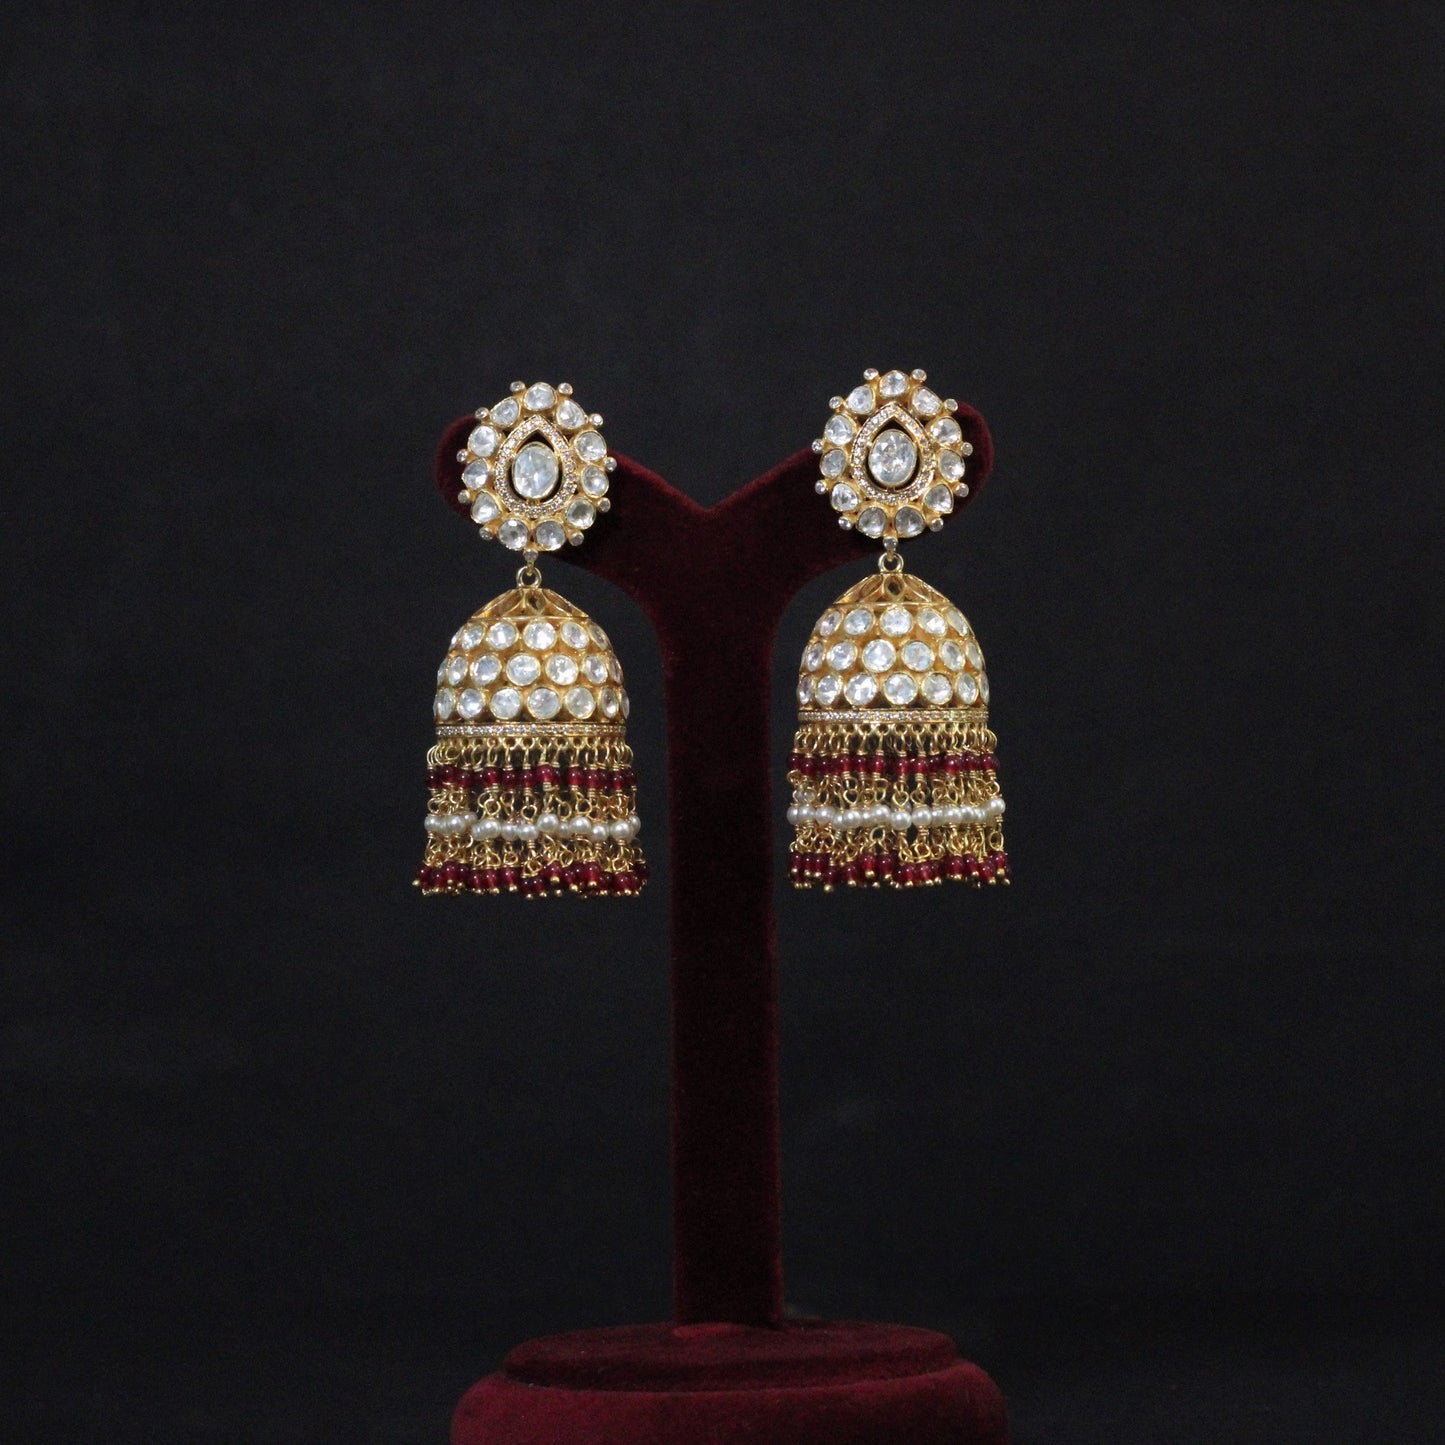 GOLD PLATED STERLING SILVER JHUMKI EARRINGS IN JADAU COLLECTIONS.